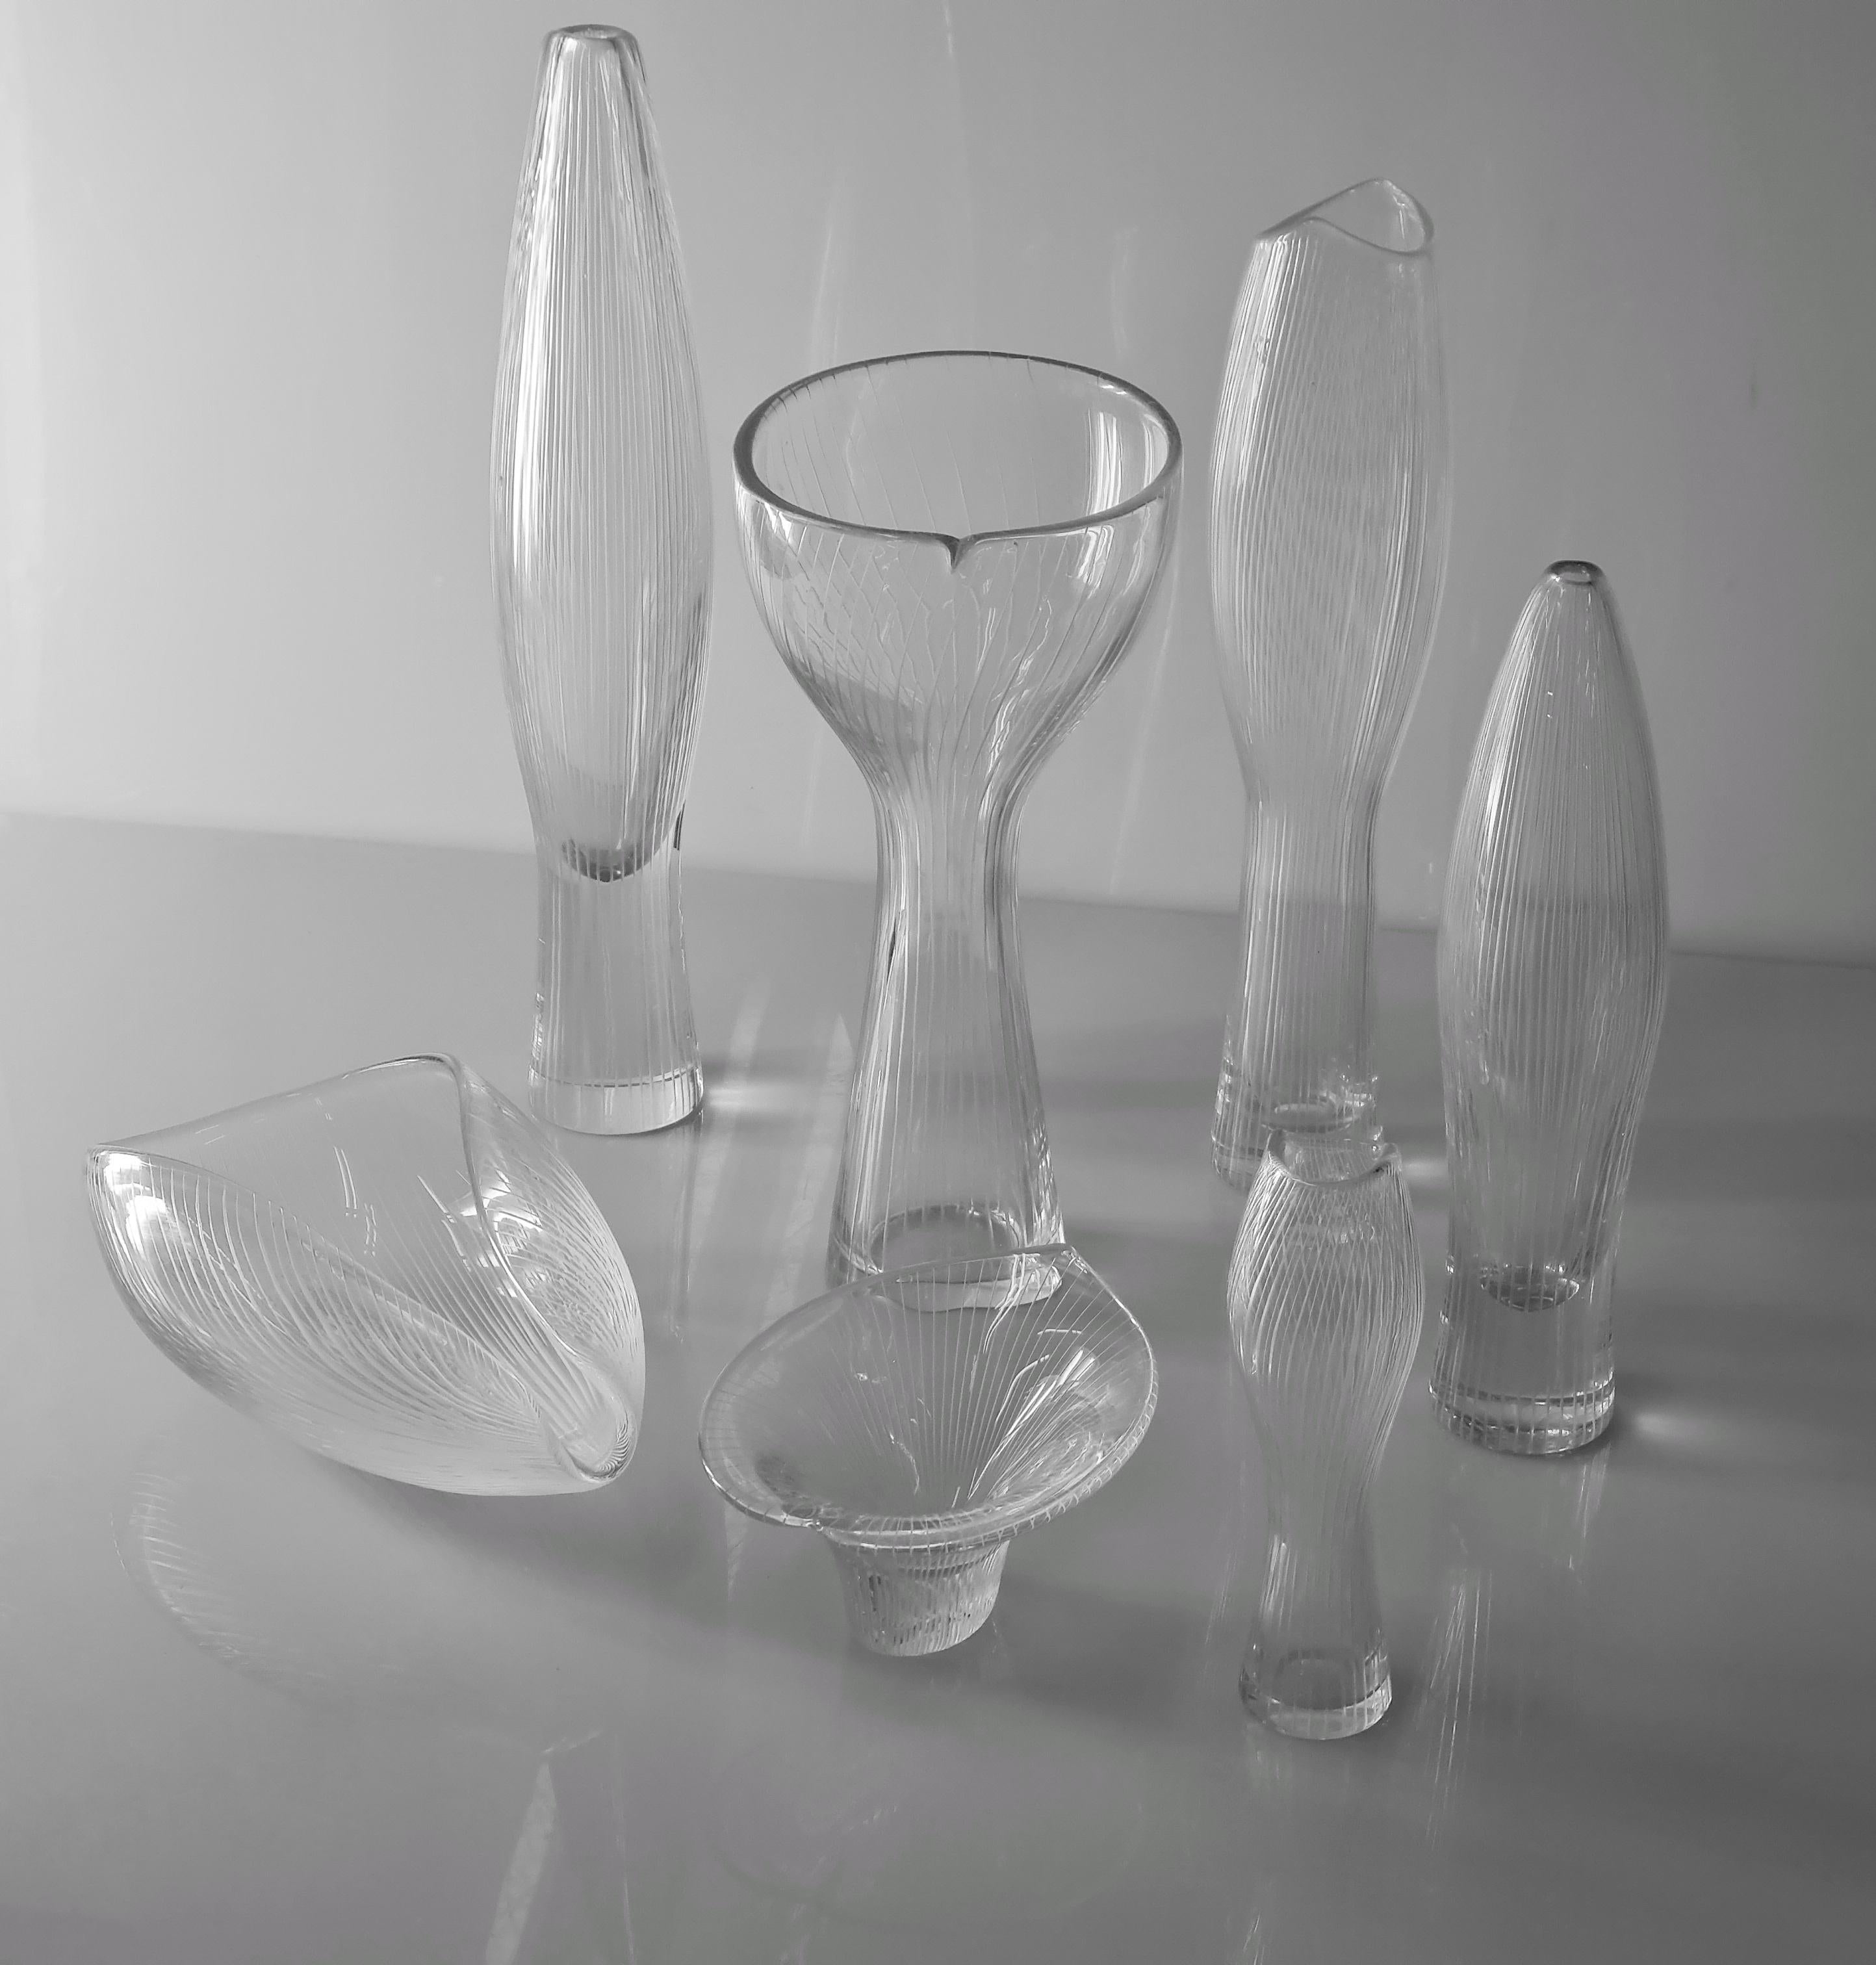 Tapio Wirkkala designed a huge variety of these art glass objects in a number of different sizes. The motifs were mostly from nature as mushrooms or sea shells or a foals leg, and so on..

Tapio Wirkkala (1915-1985) was a genius designer and